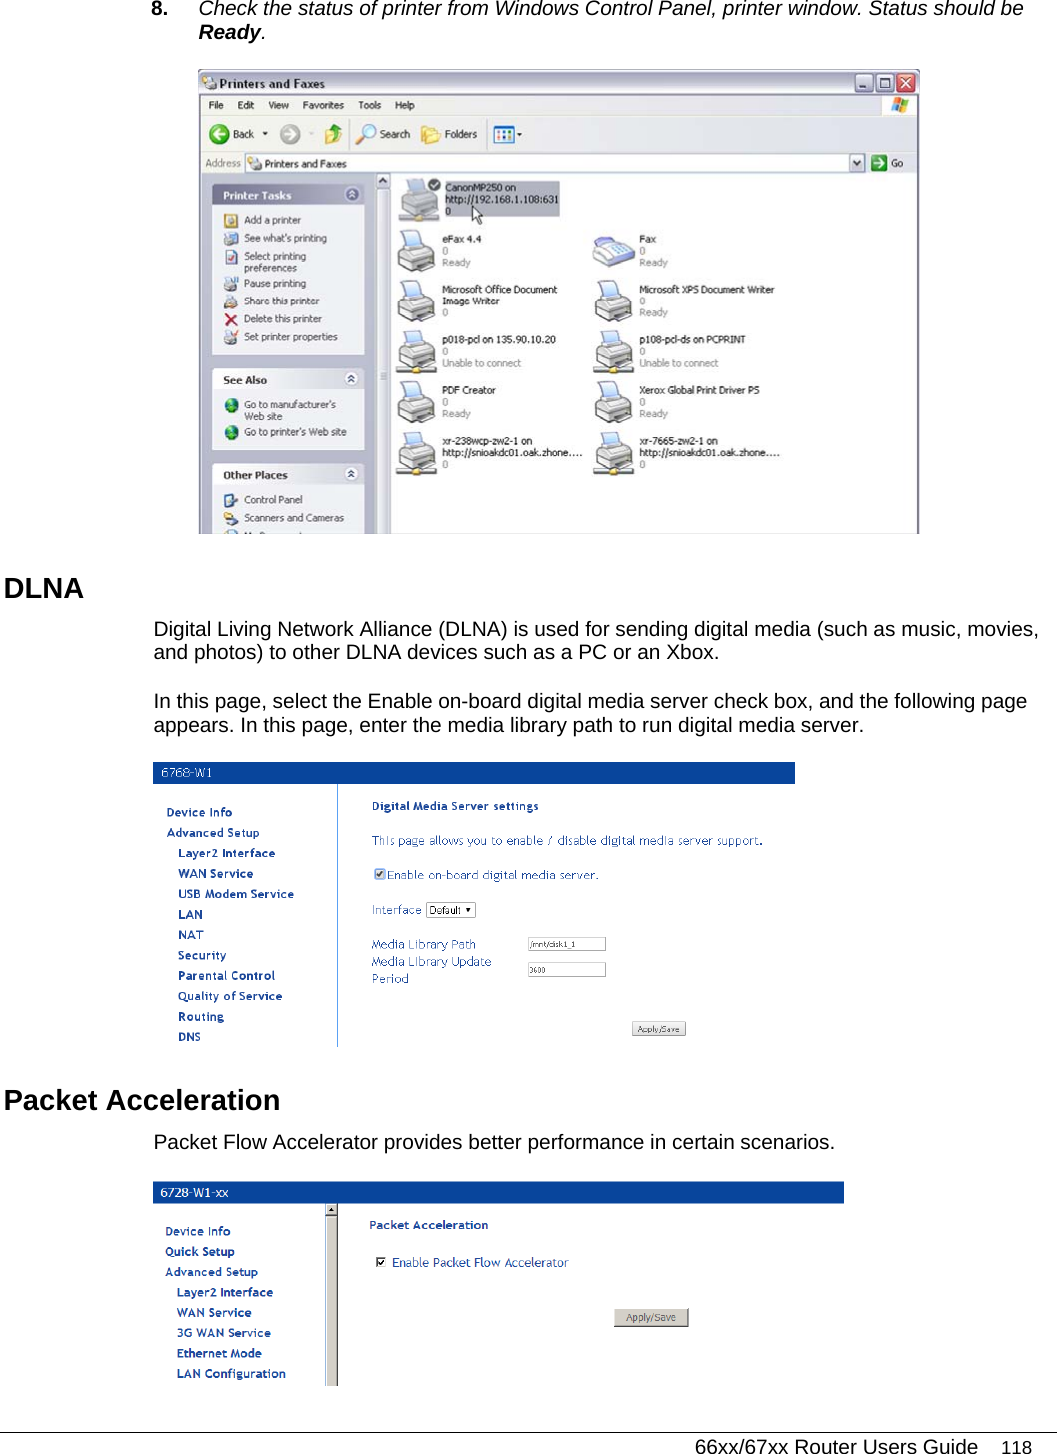   66xx/67xx Router Users Guide 118 8.  Check the status of printer from Windows Control Panel, printer window. Status should be Ready.  DLNA Digital Living Network Alliance (DLNA) is used for sending digital media (such as music, movies, and photos) to other DLNA devices such as a PC or an Xbox.  In this page, select the Enable on-board digital media server check box, and the following page appears. In this page, enter the media library path to run digital media server.  Packet Acceleration Packet Flow Accelerator provides better performance in certain scenarios.  